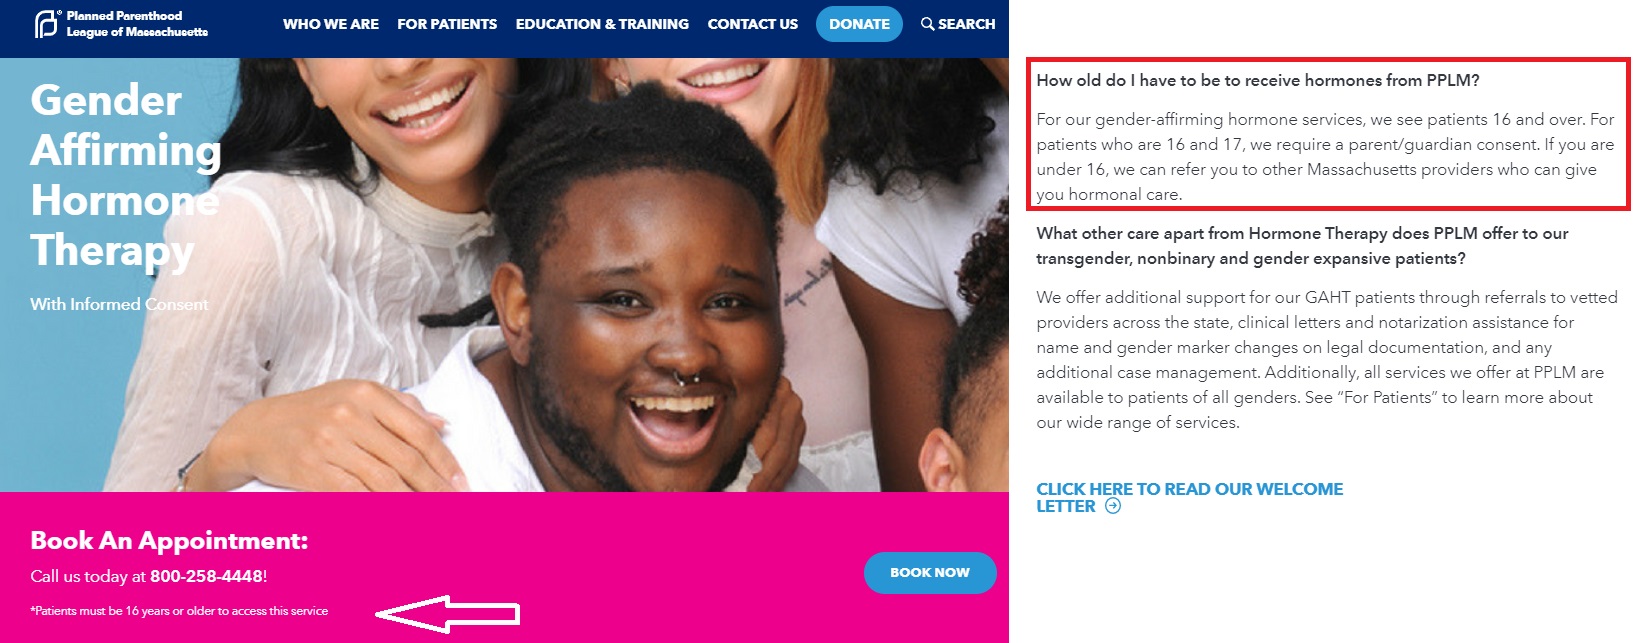 Image: Planned Parenthood League of Massachusetts Gender Affirming services for teens